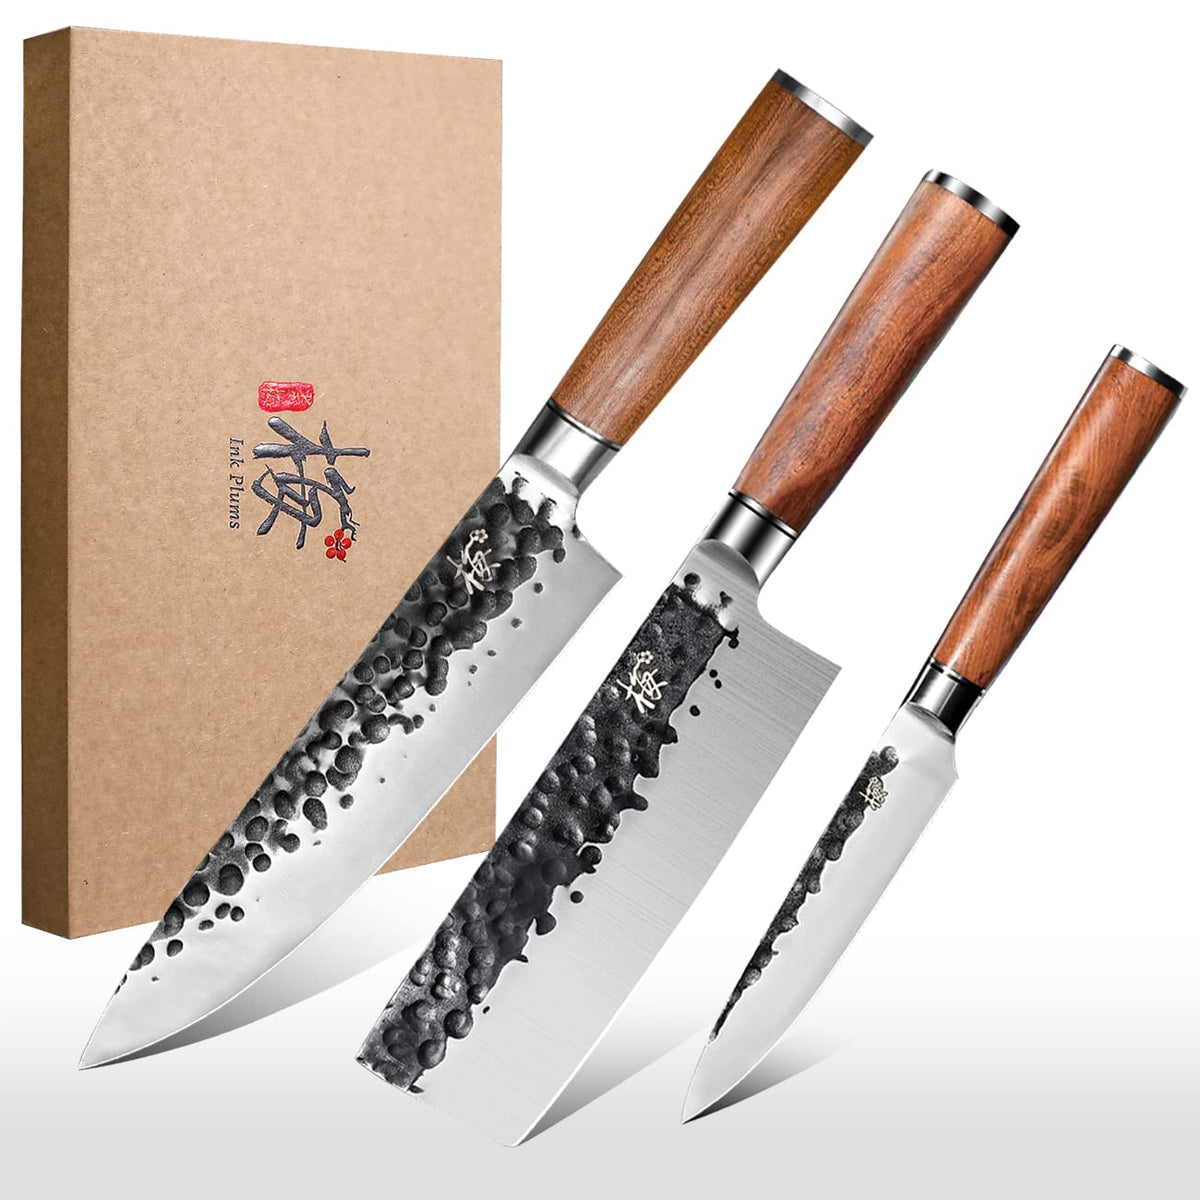 Professional Chef Knife Set 5 Piece Stainless Steel Blade, Balanced,  Ergonomic Handle, for Use in Home, Hotel or Restaurant 